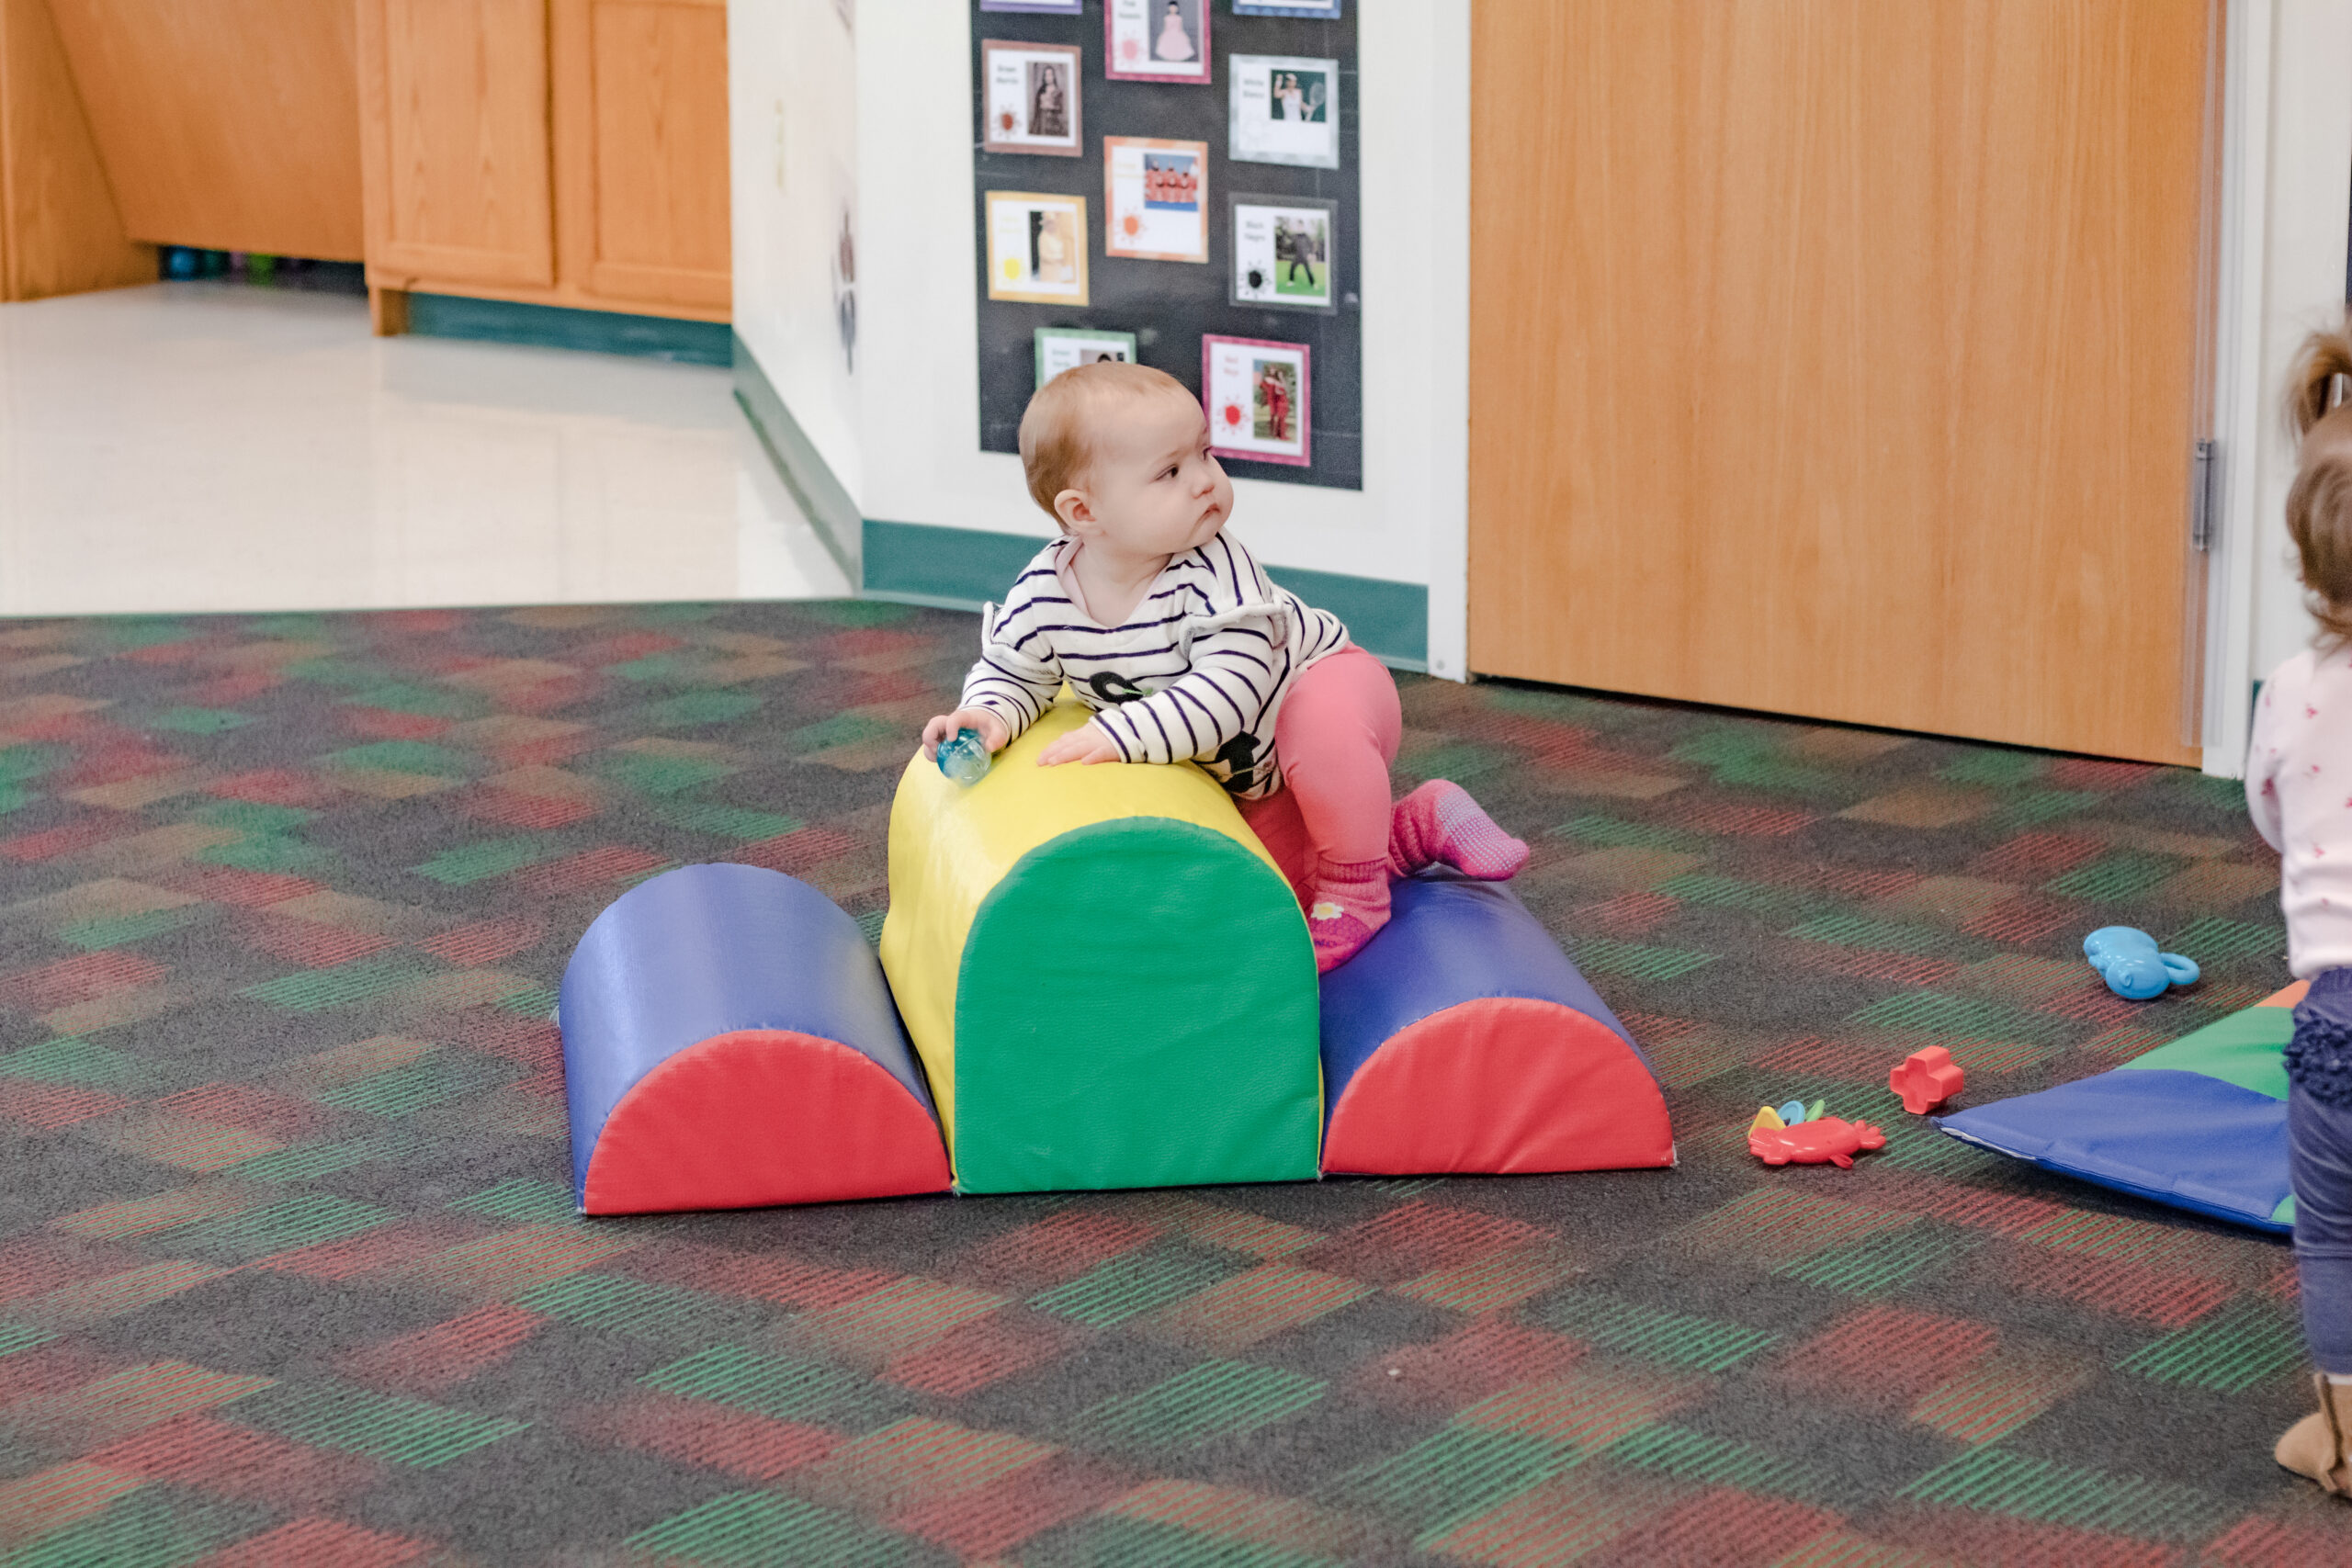 Infant climbing on soft arches in play area